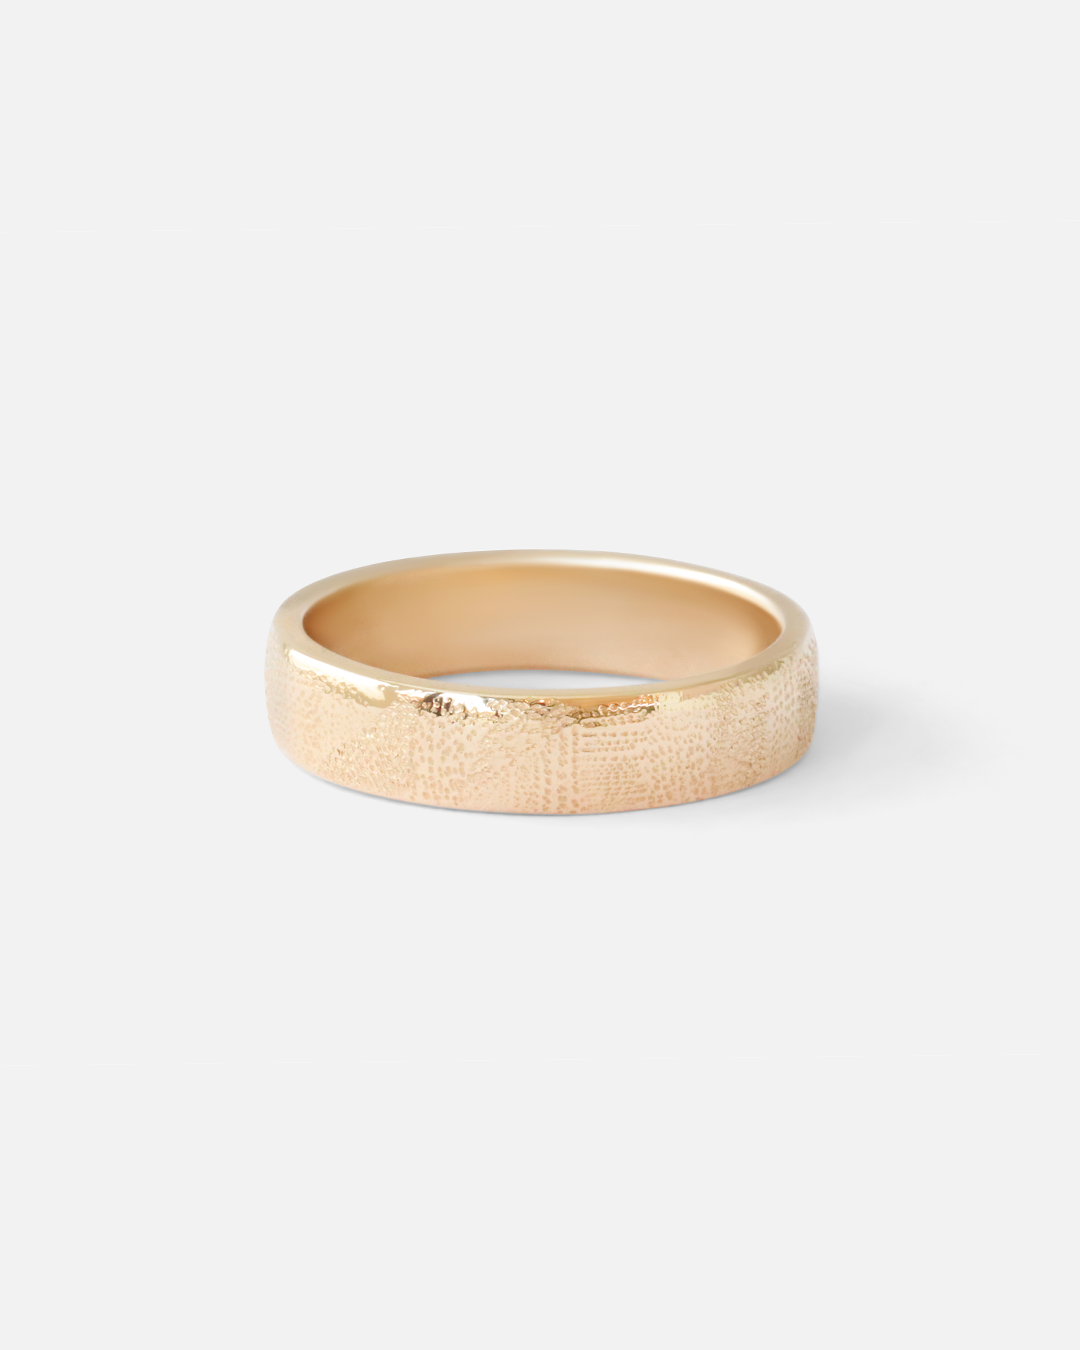 All that Glitters Band / 5mm By Young Sun Song in Wedding Bands Category